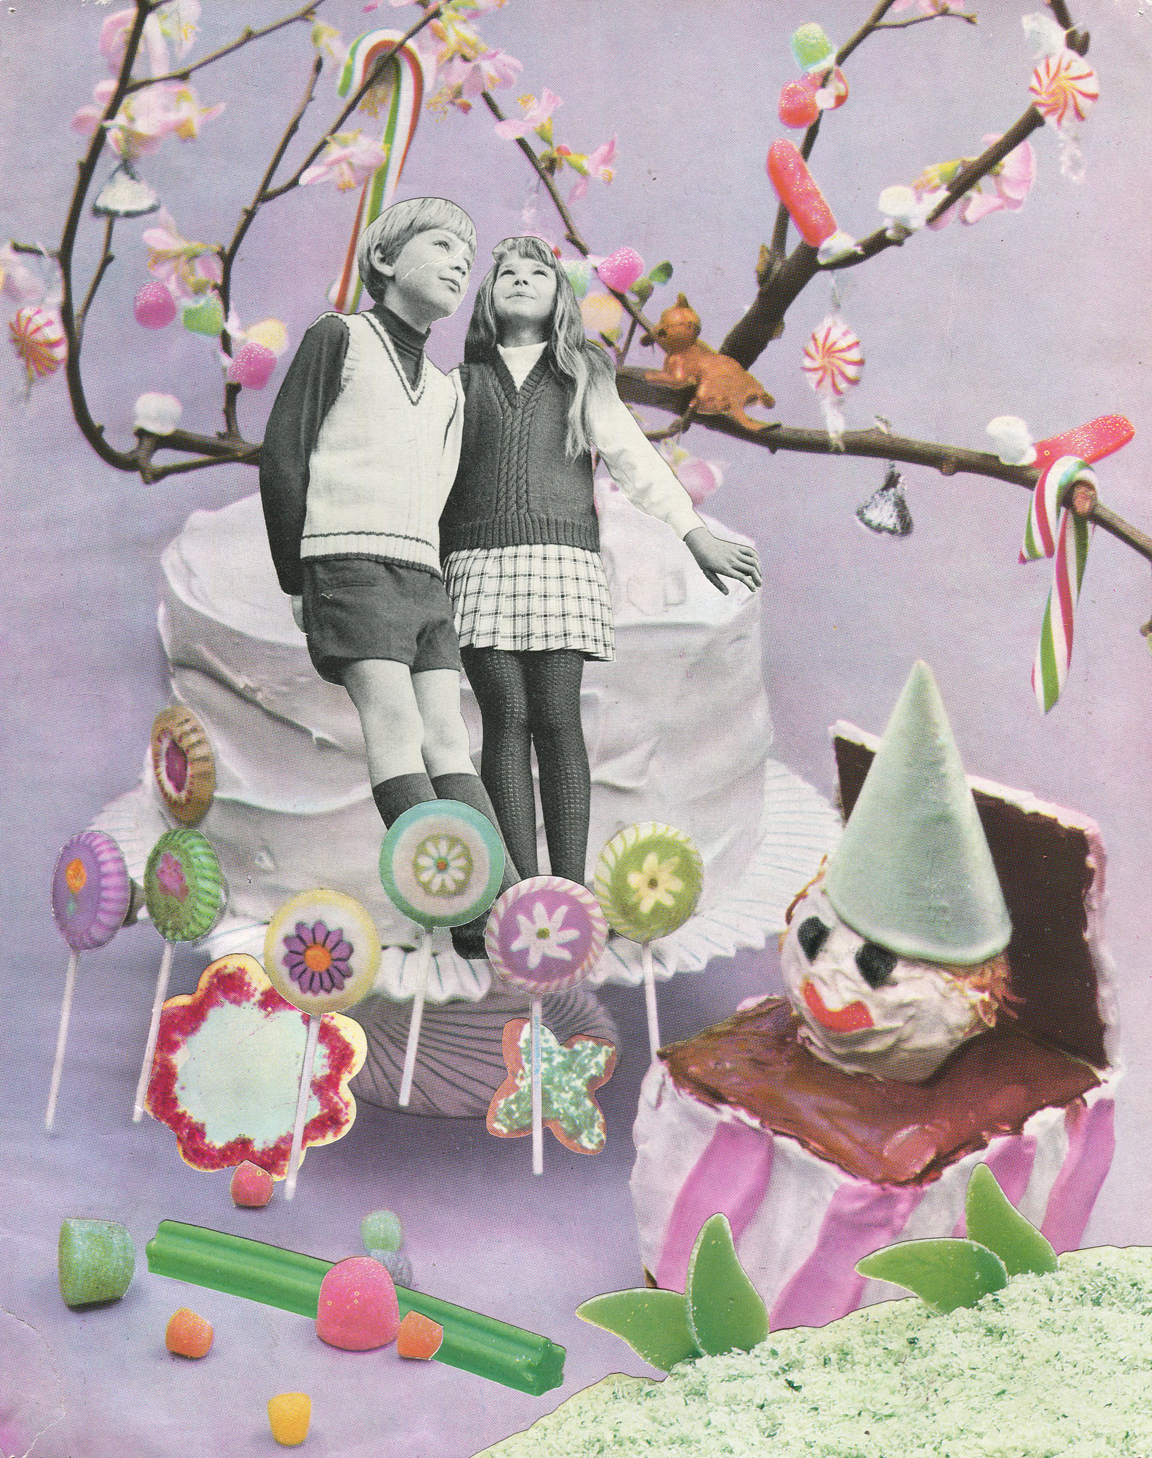 Trim With Coloured Sugar #8, 2015, collage, found paper